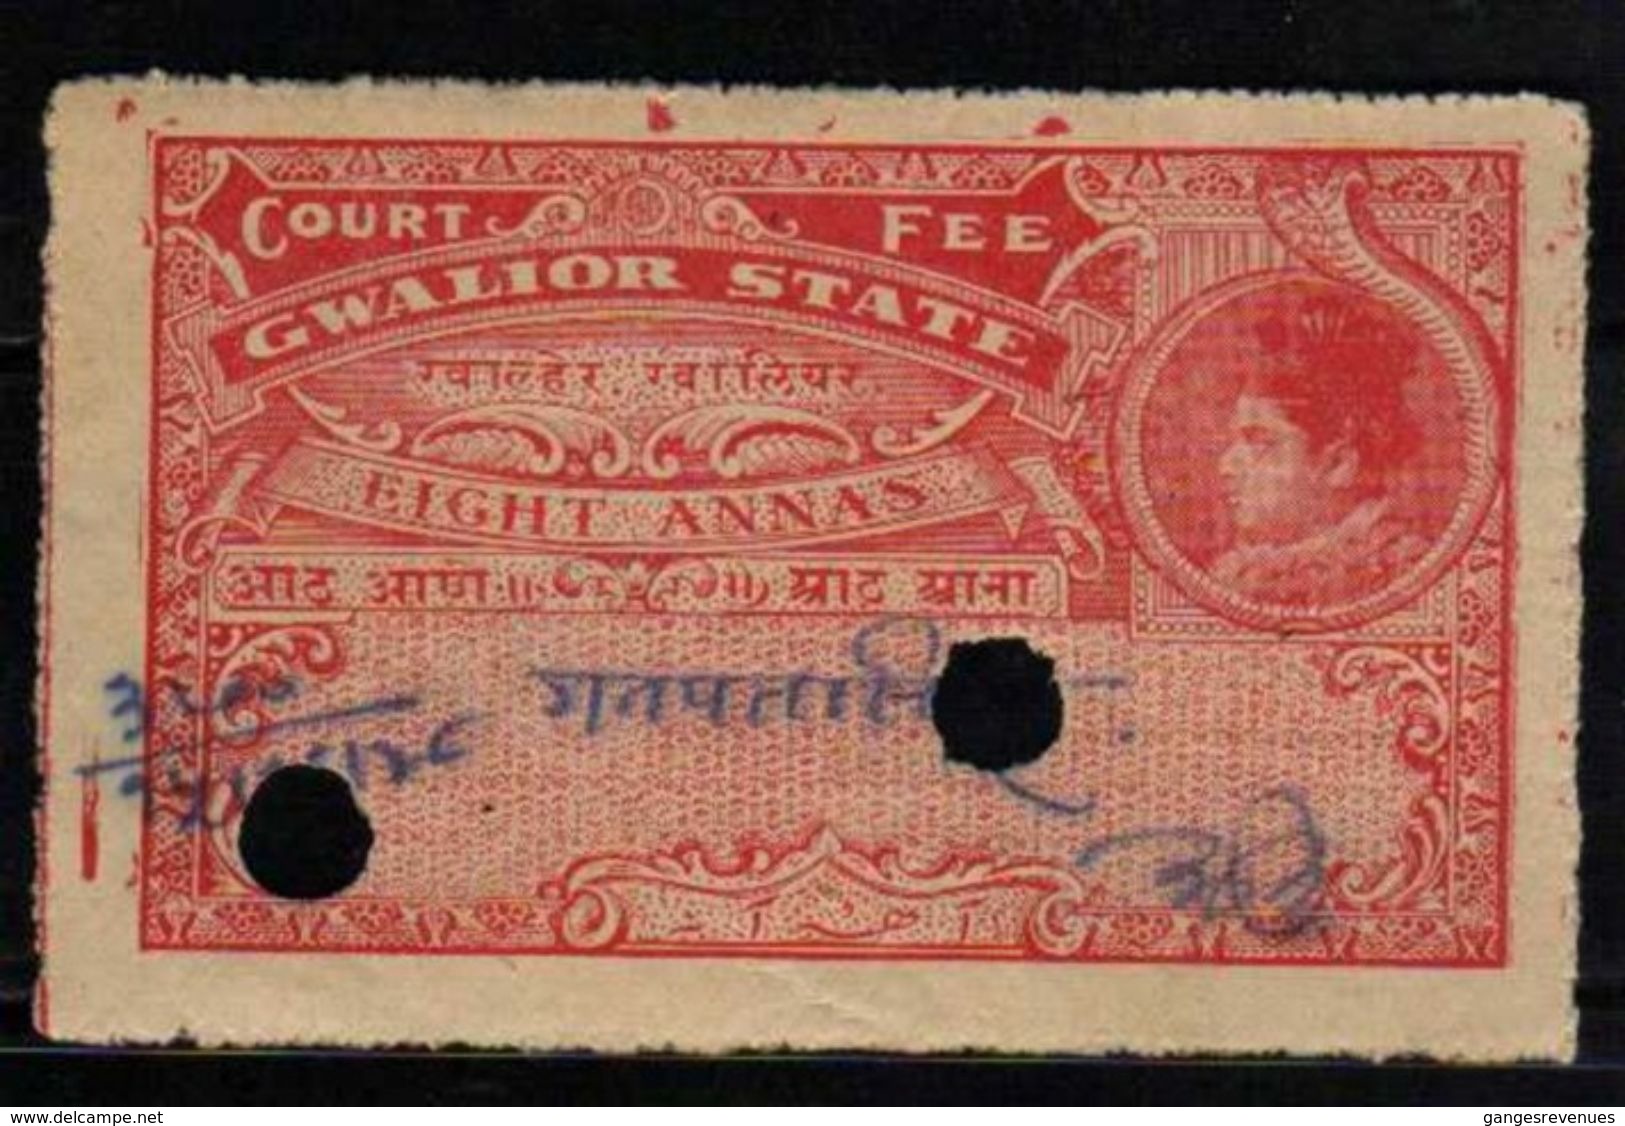 GWALIOR  State  8A  Court Fee Type 22  K&M 225 #  98076  Inde Indien  India Fiscaux Fiscal Revenue - Gwalior